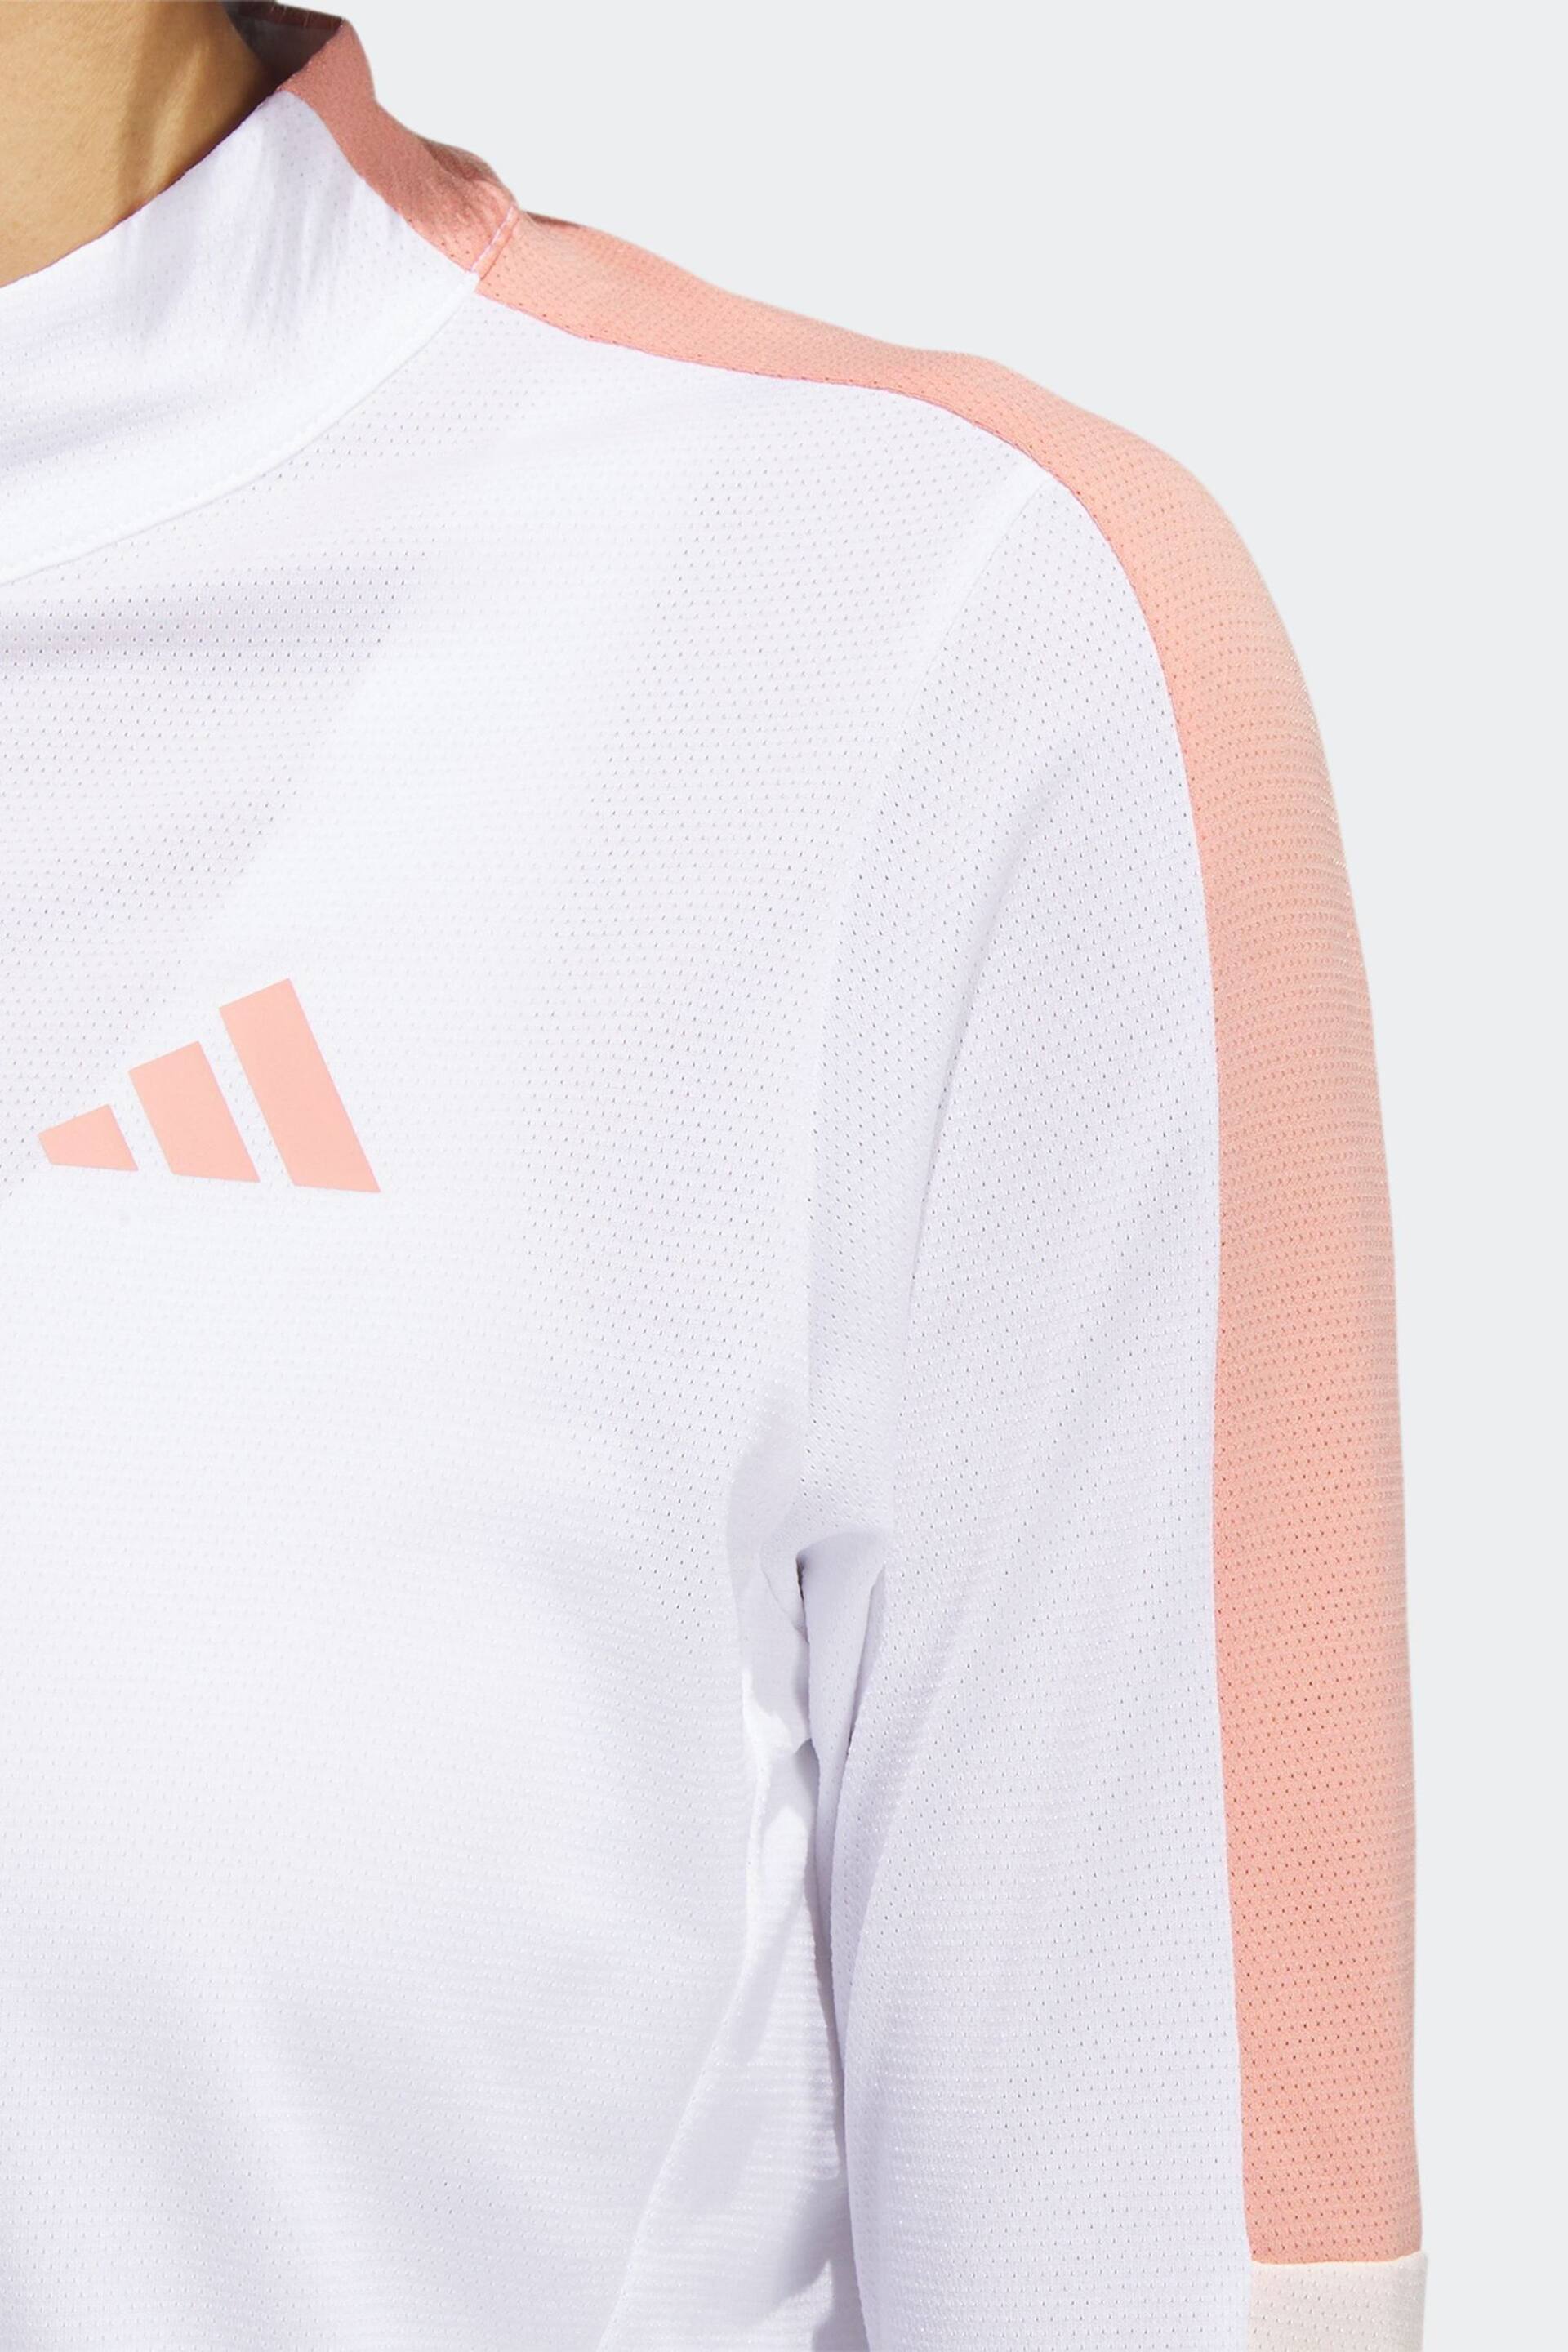 adidas Golf White/Coral Made With Nature Mock Neck Long-Sleeve Top - Image 6 of 7